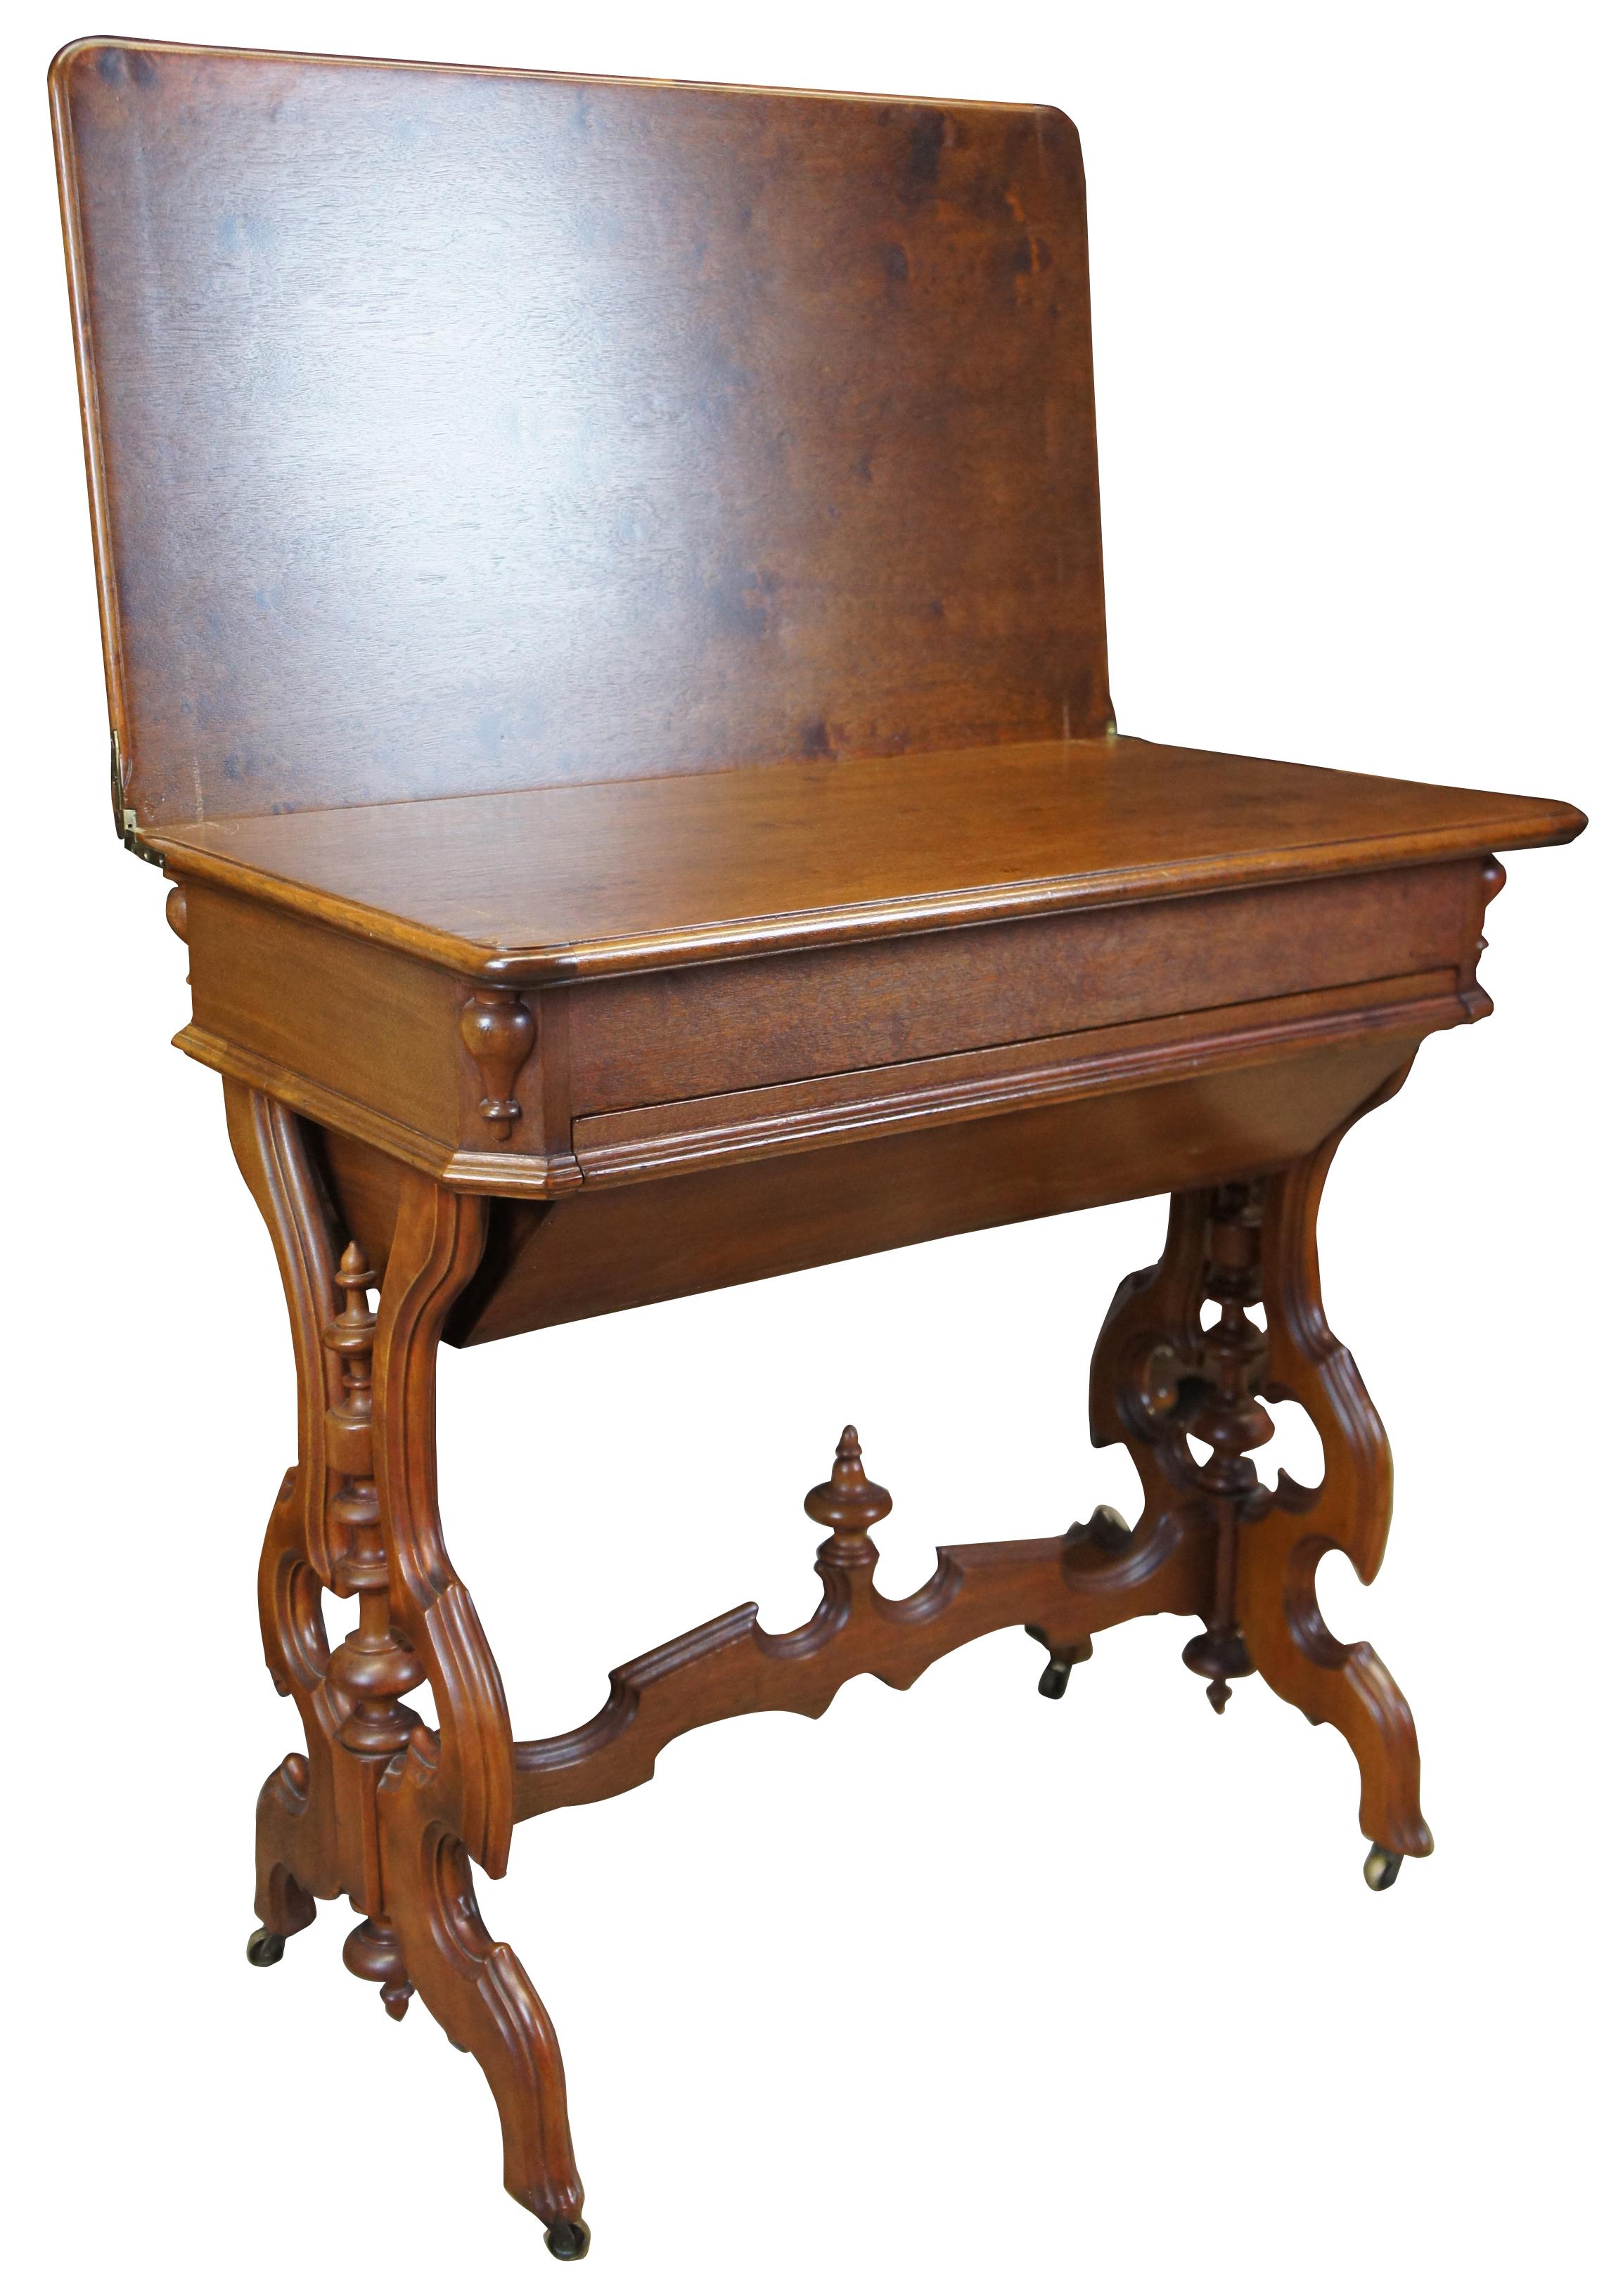 Walnut parlor table, circa 1880s. A unique dual functioning piece that can be used as a swivel top game table or sewing cabinet. Features a compartment for storage beneath the table top as well as a large dovetailed troth drawer. Intricately